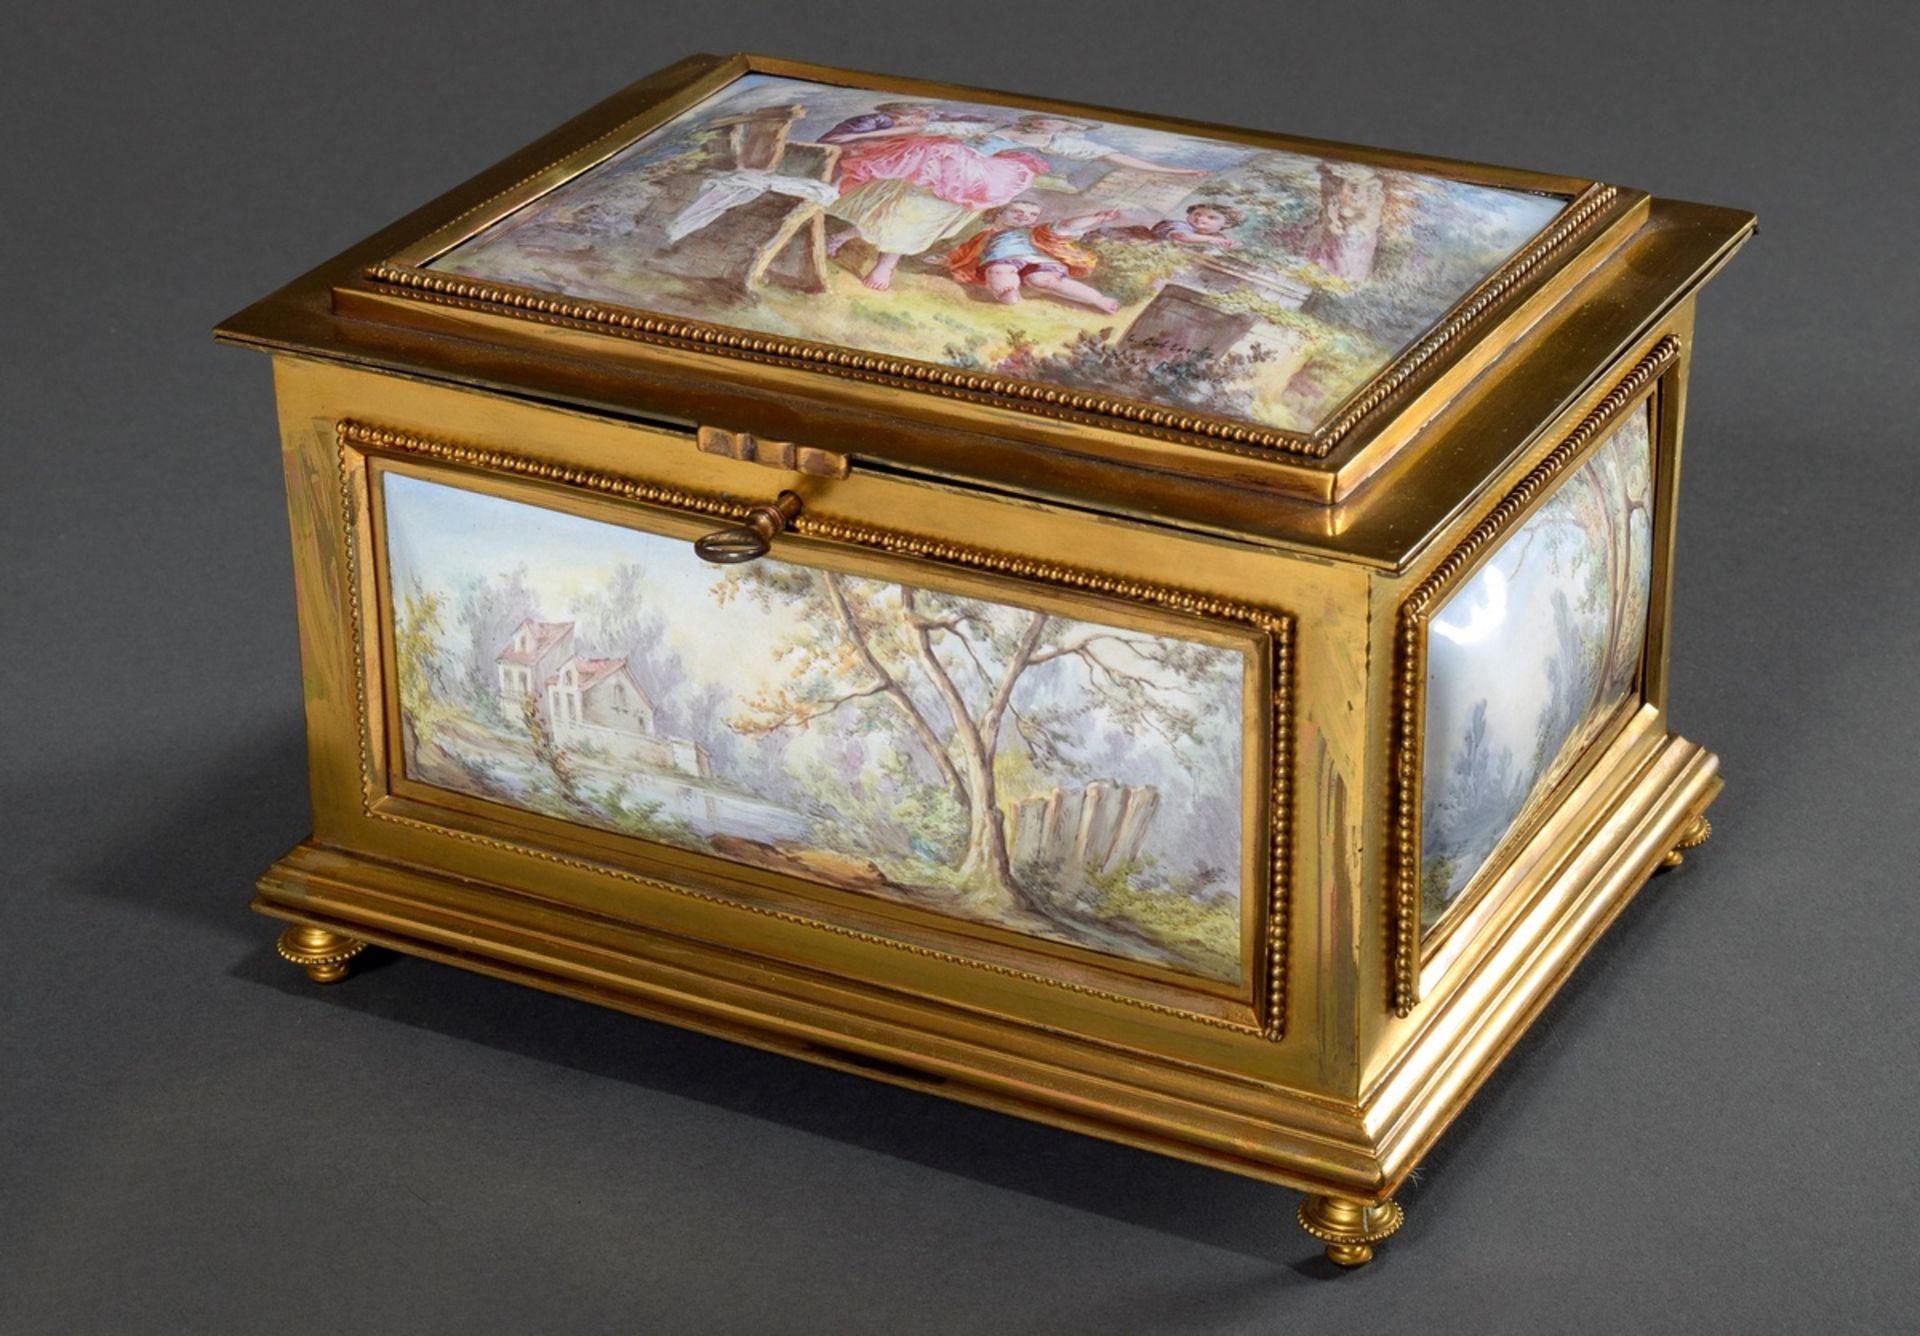 Große französische Emaille Schatulle mit 5 lupen | Large French enamel casket with 5 flawless pictu